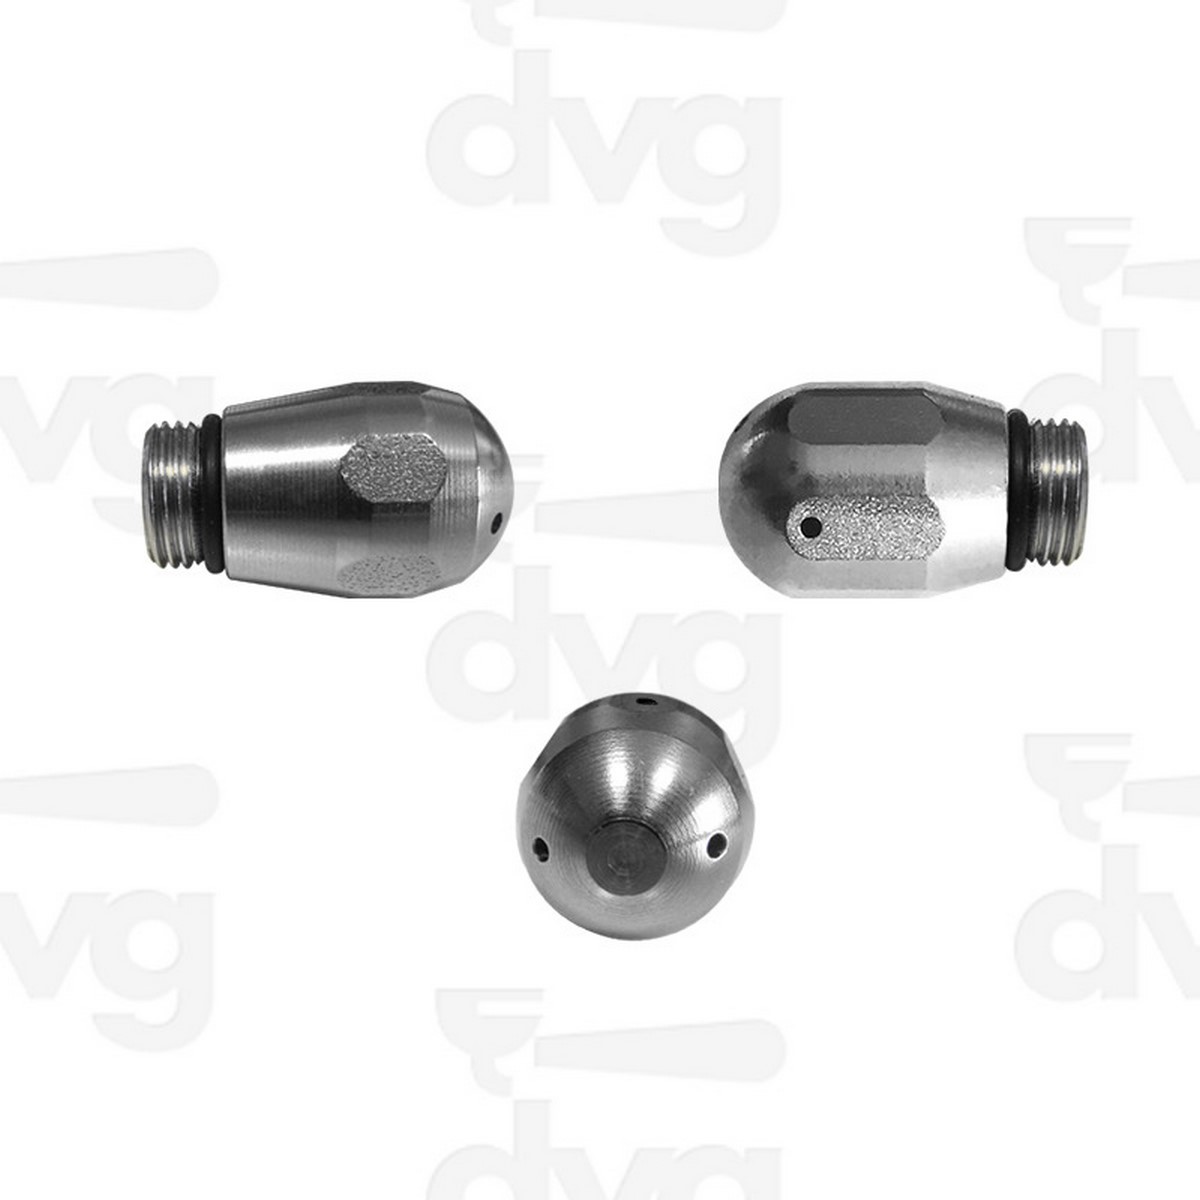 Acquista online 9V87237-554 Steam tip 2 holes 1,2 mm + hole lateral 1,2 mm